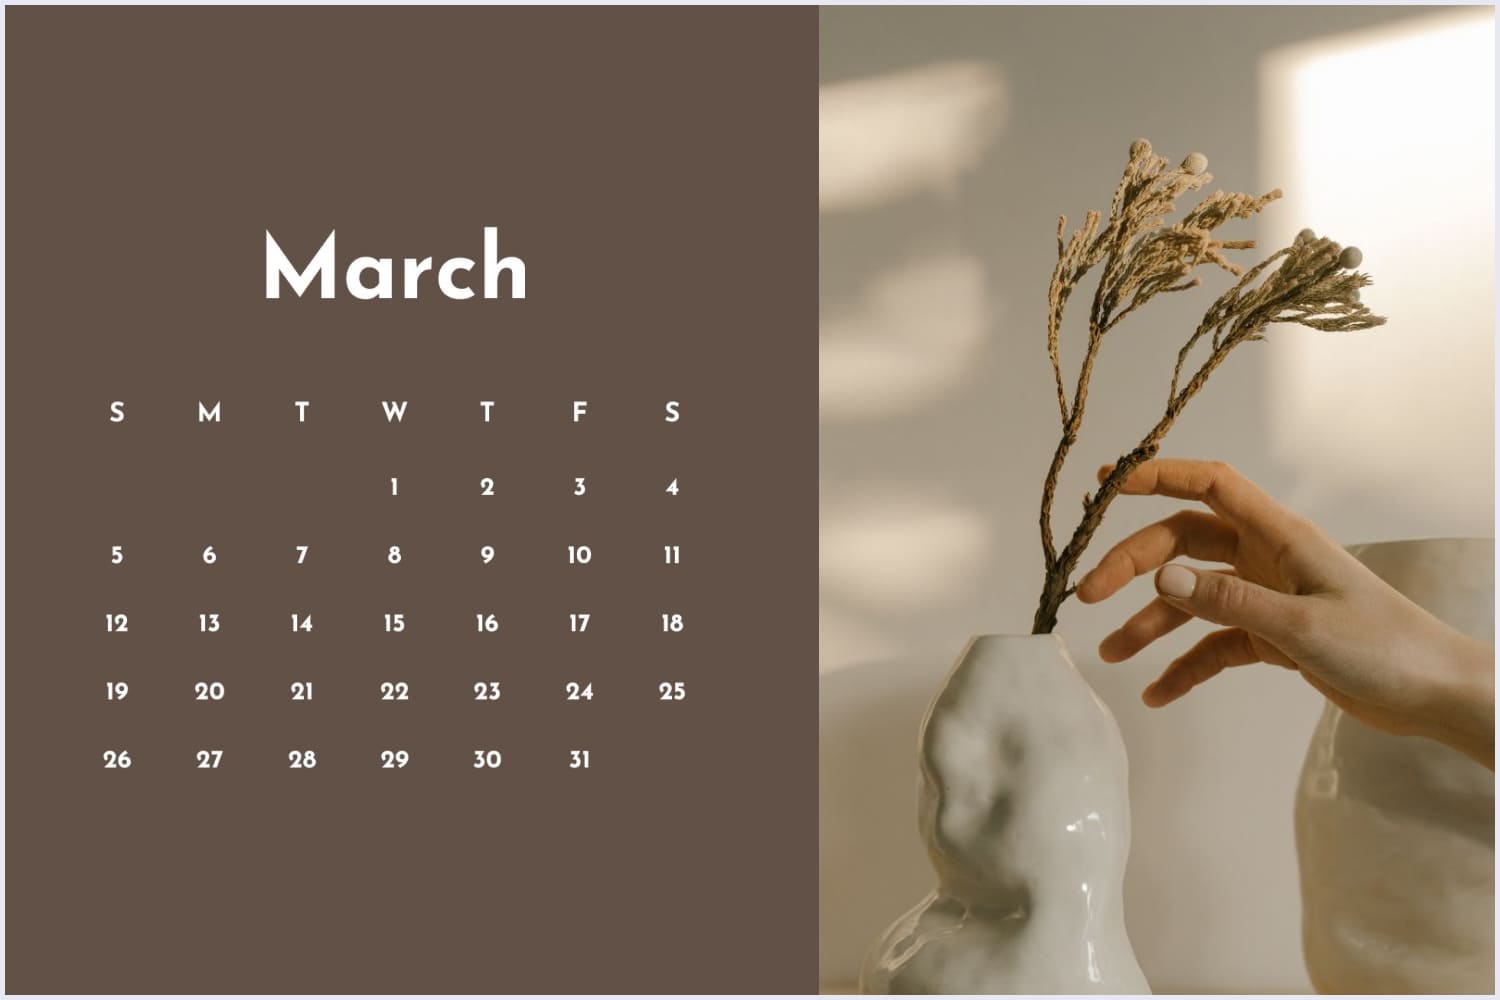 Calendar for March with a photo of a vase with a branch and a hand.